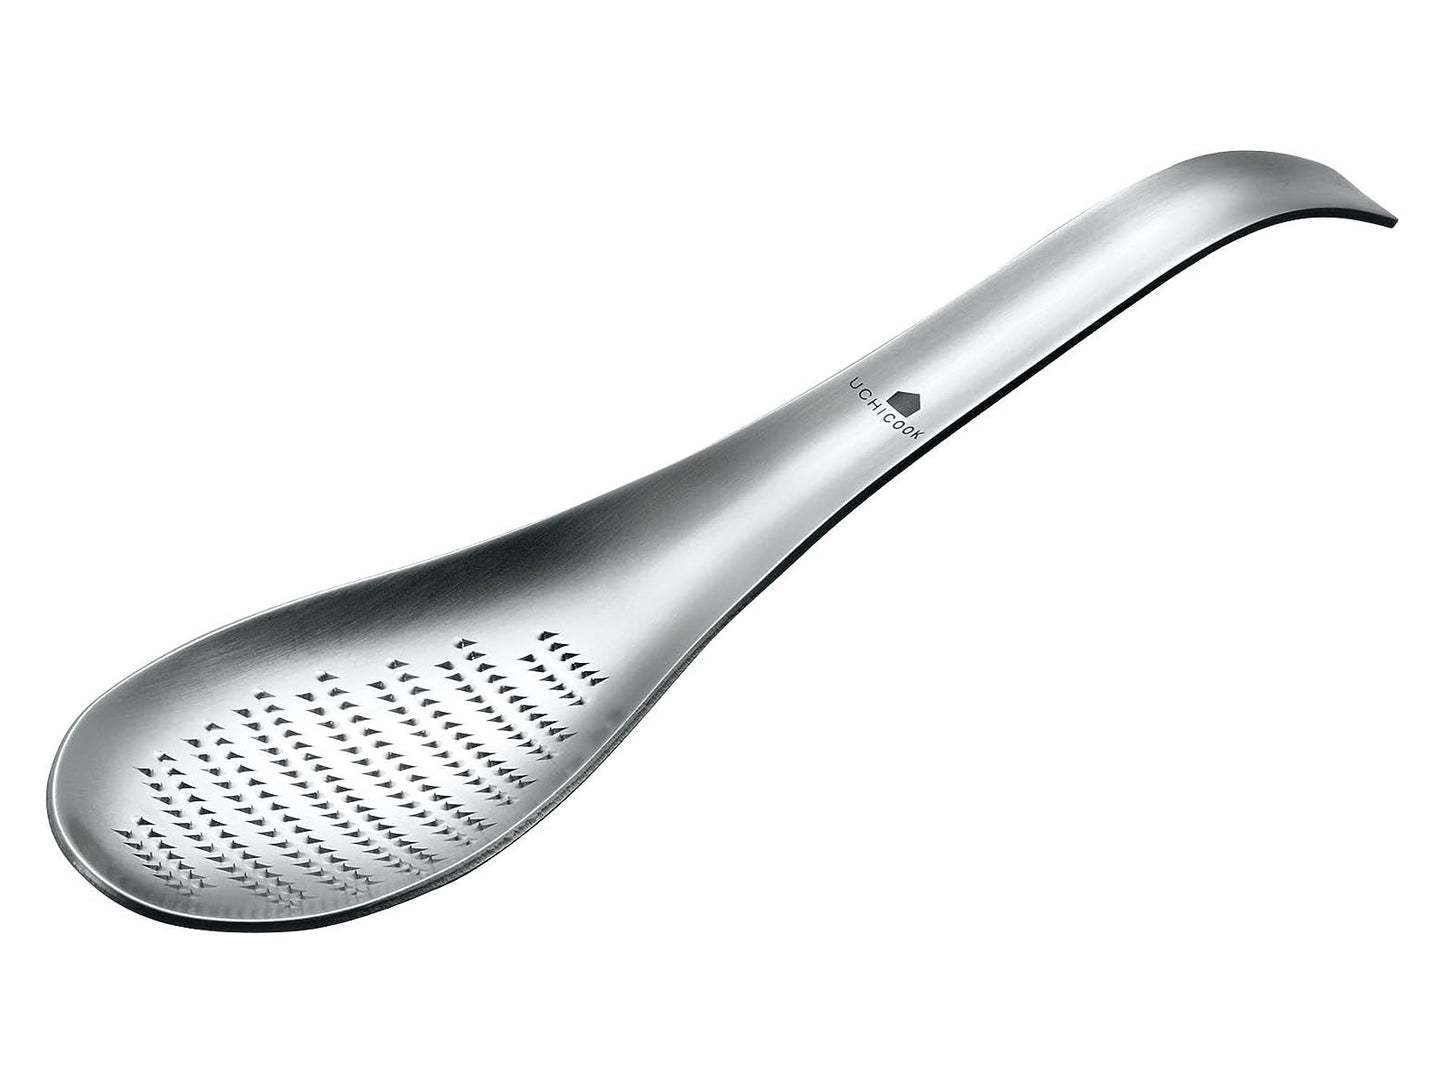 Stainless Steel Grater Spoon, Made in Japan